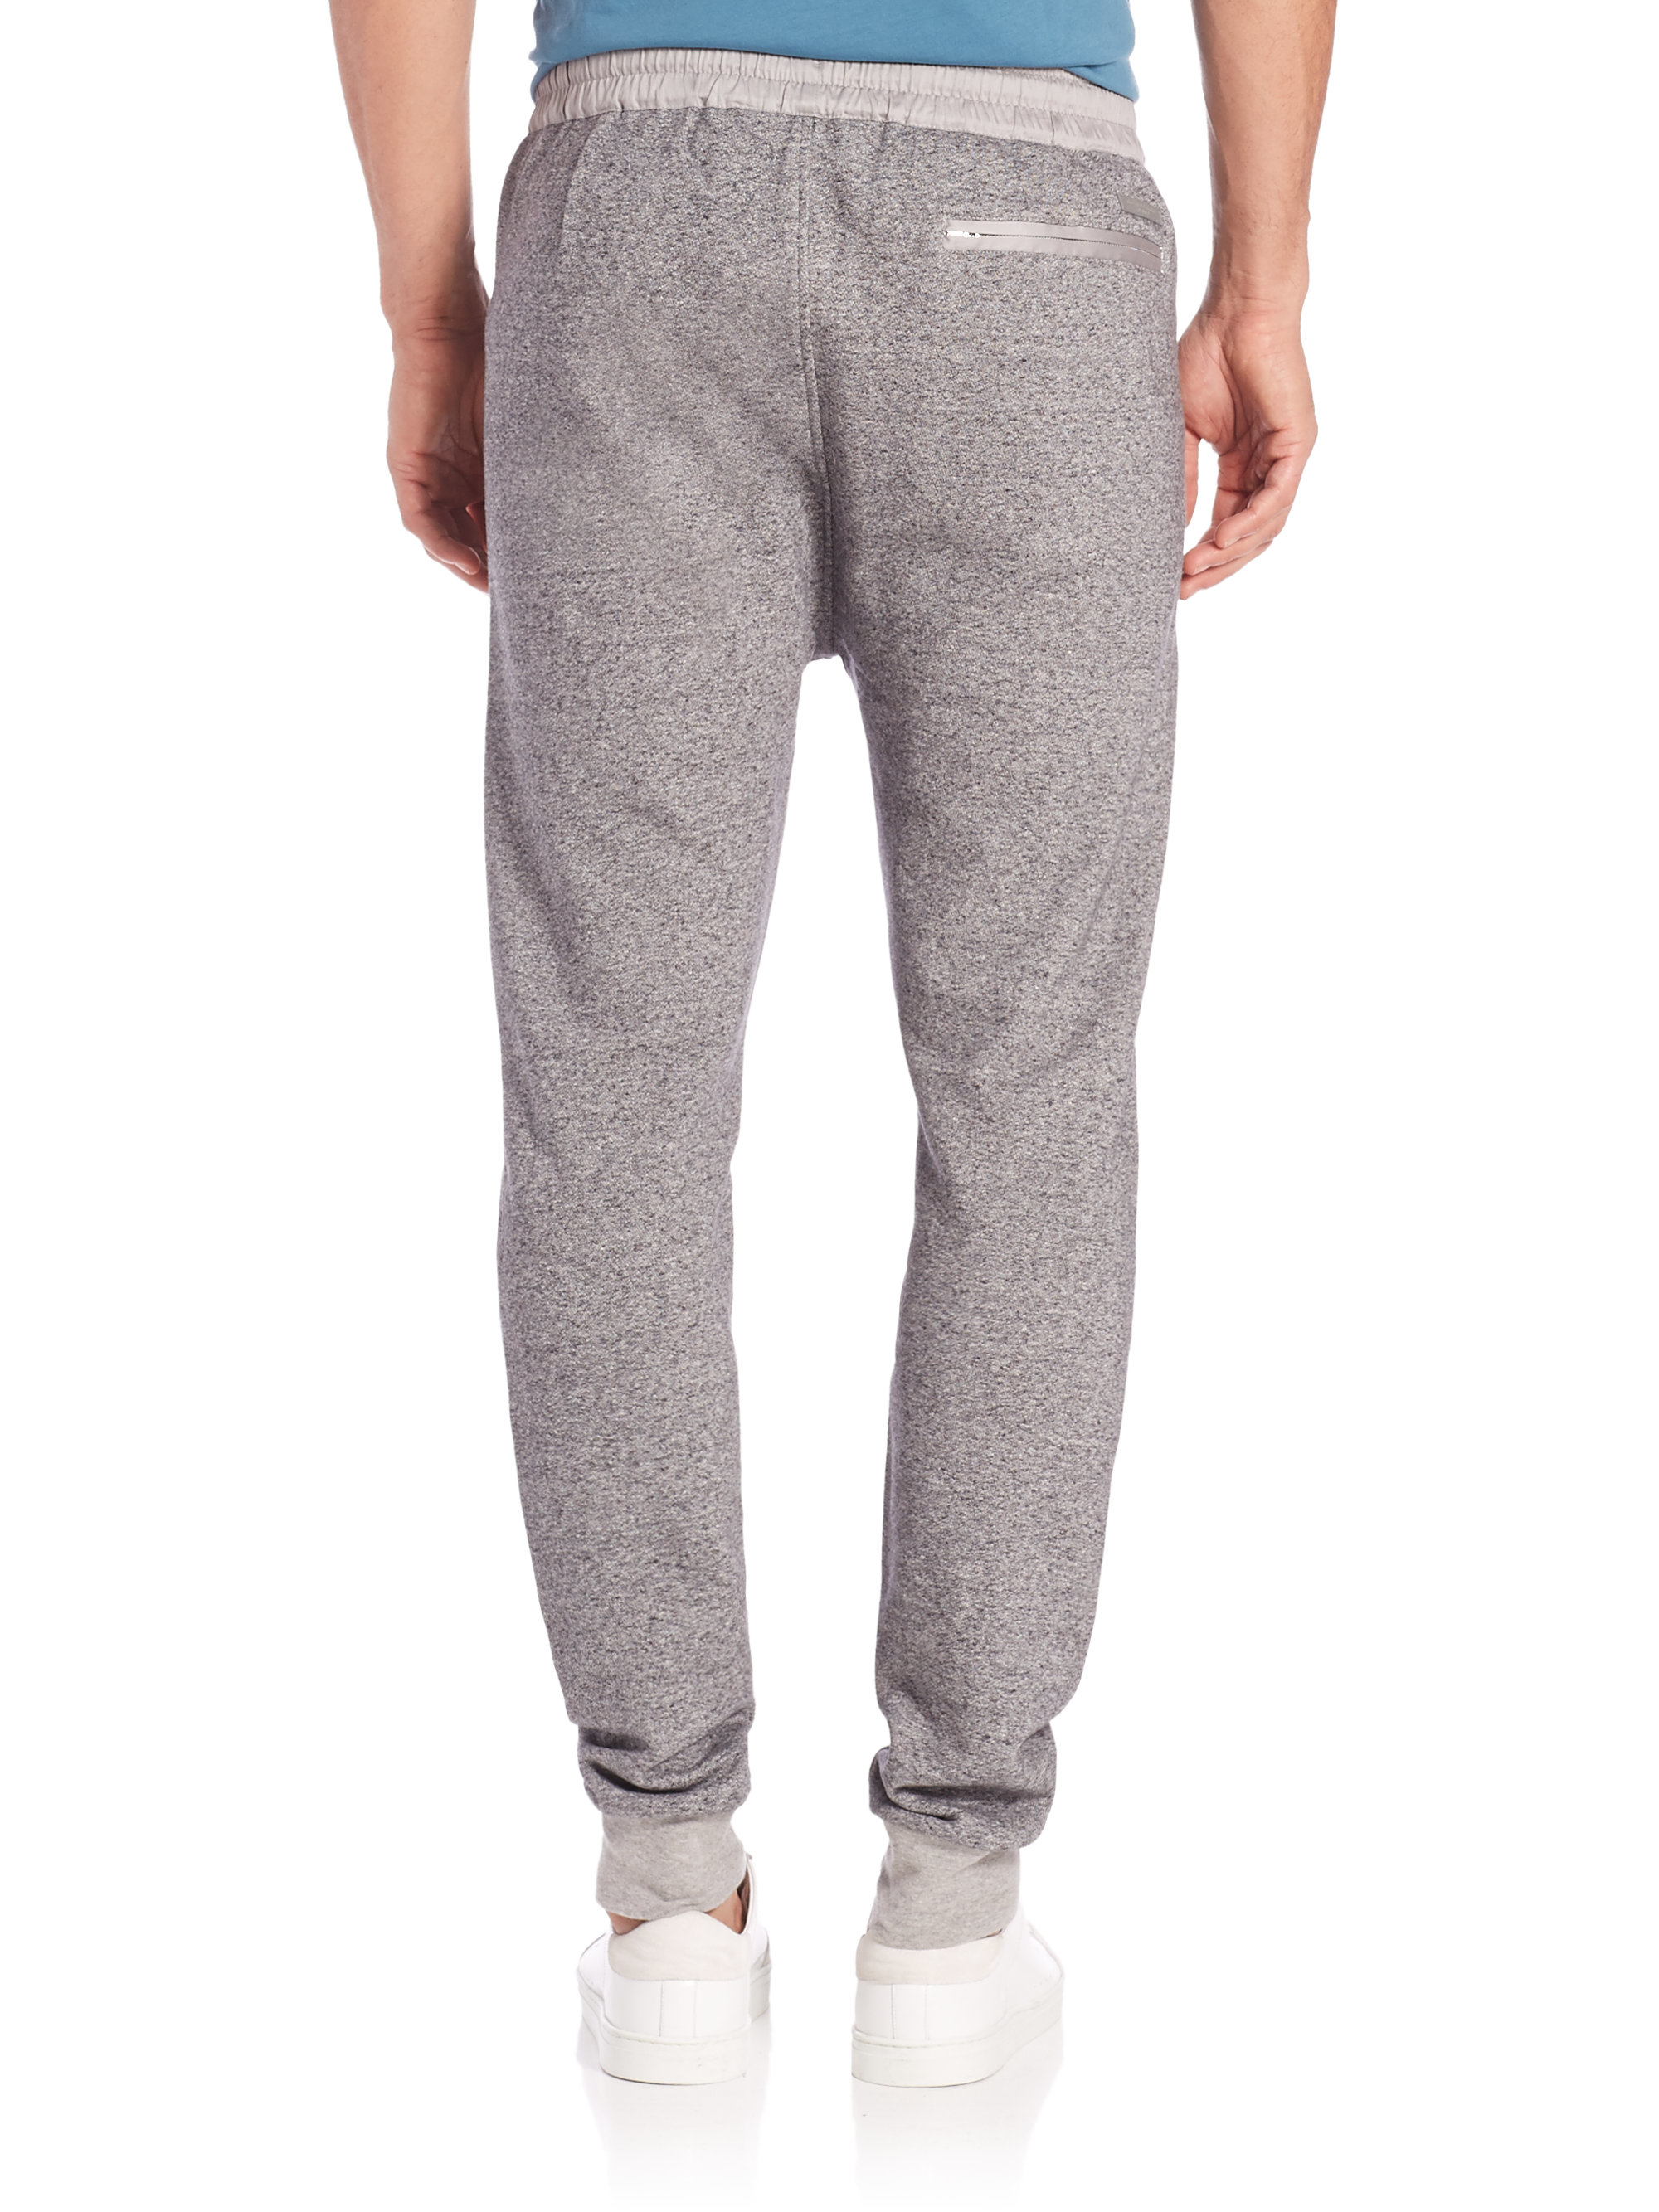 Lyst - Burberry Haleford Joggers in Gray for Men